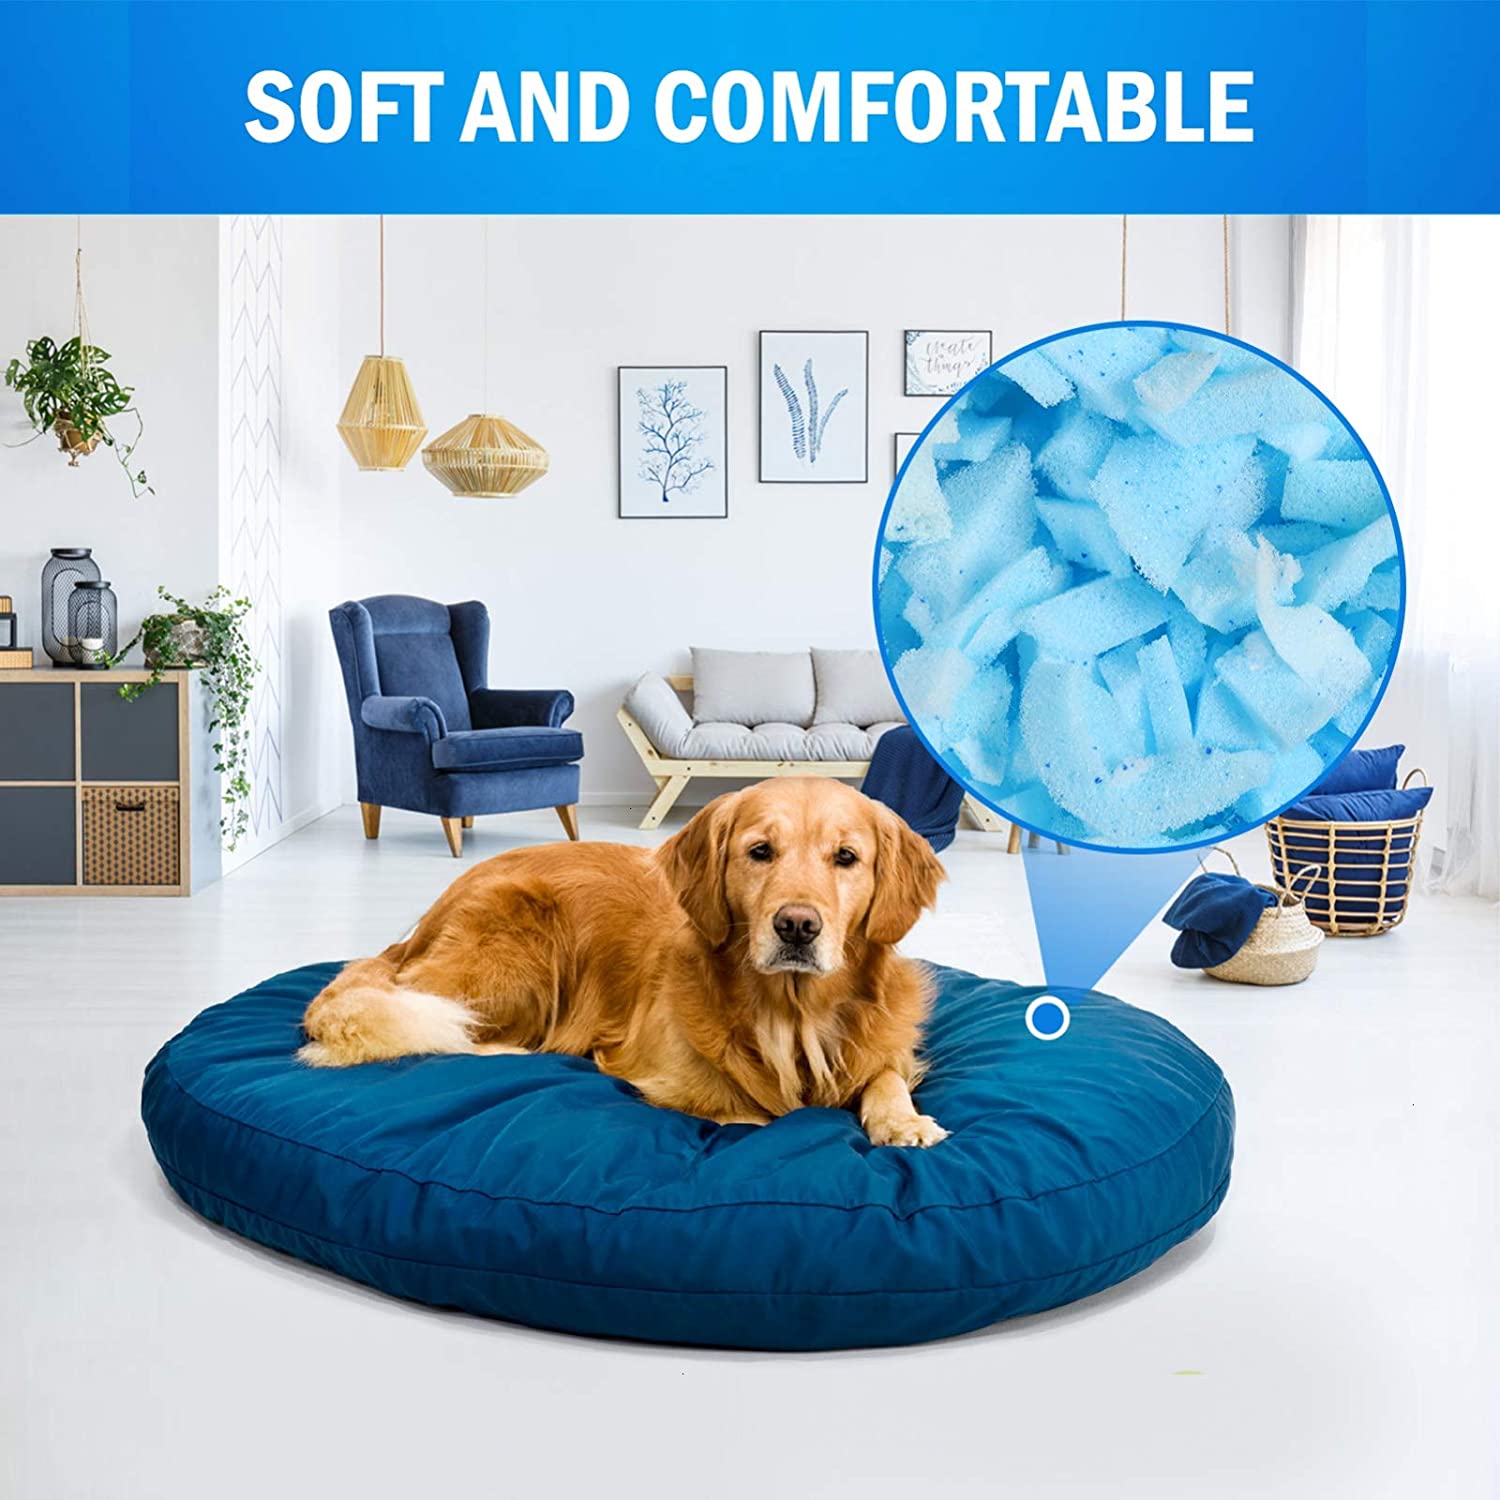 anzhixiu Bean Bag Filler Shredded Memory Foam 100% New 10 Pounds,Pillow  Stuffing for Couch Pillows, Stuffed Animals, Dog Bed & Couch Cushion  Filling, 10 Pounds